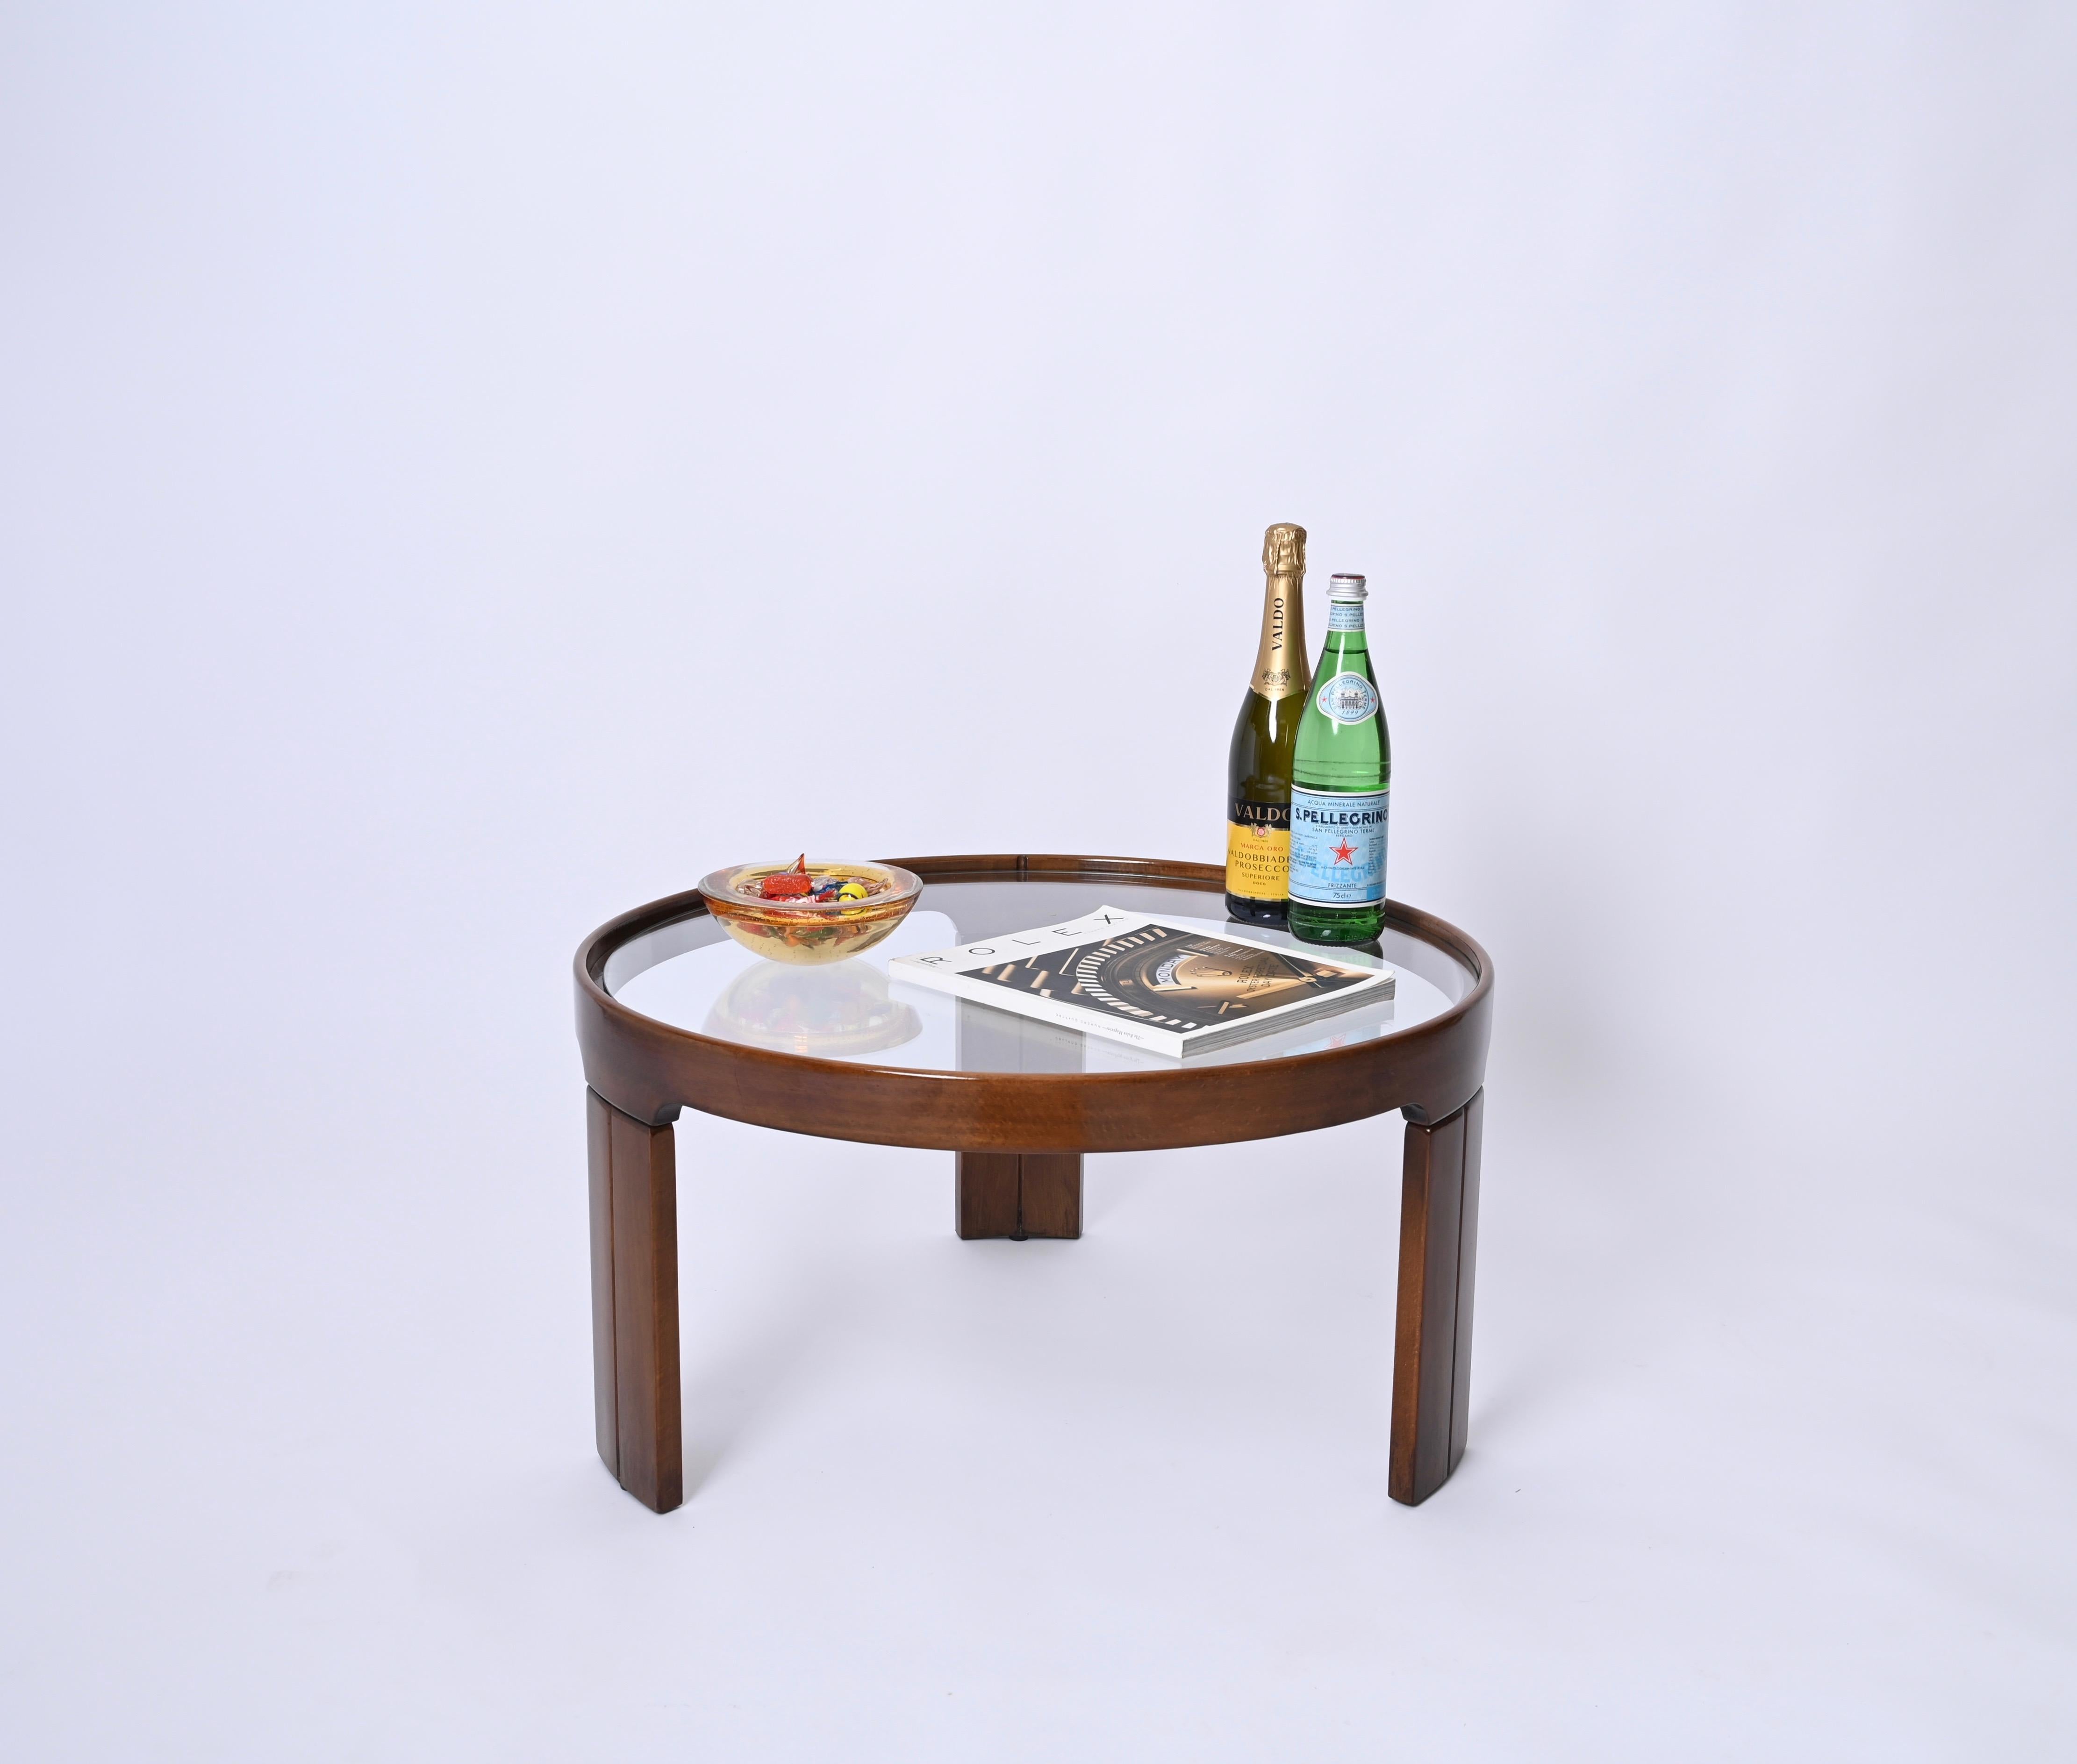 Gorgeous round tripod coffee table with crystal glass top. This stunning piece was produced by Molteni in Italy in the 1960s.  

Fully made in walnut, this side table features and incredibly elegant design, with three sturdy legs supporting a round